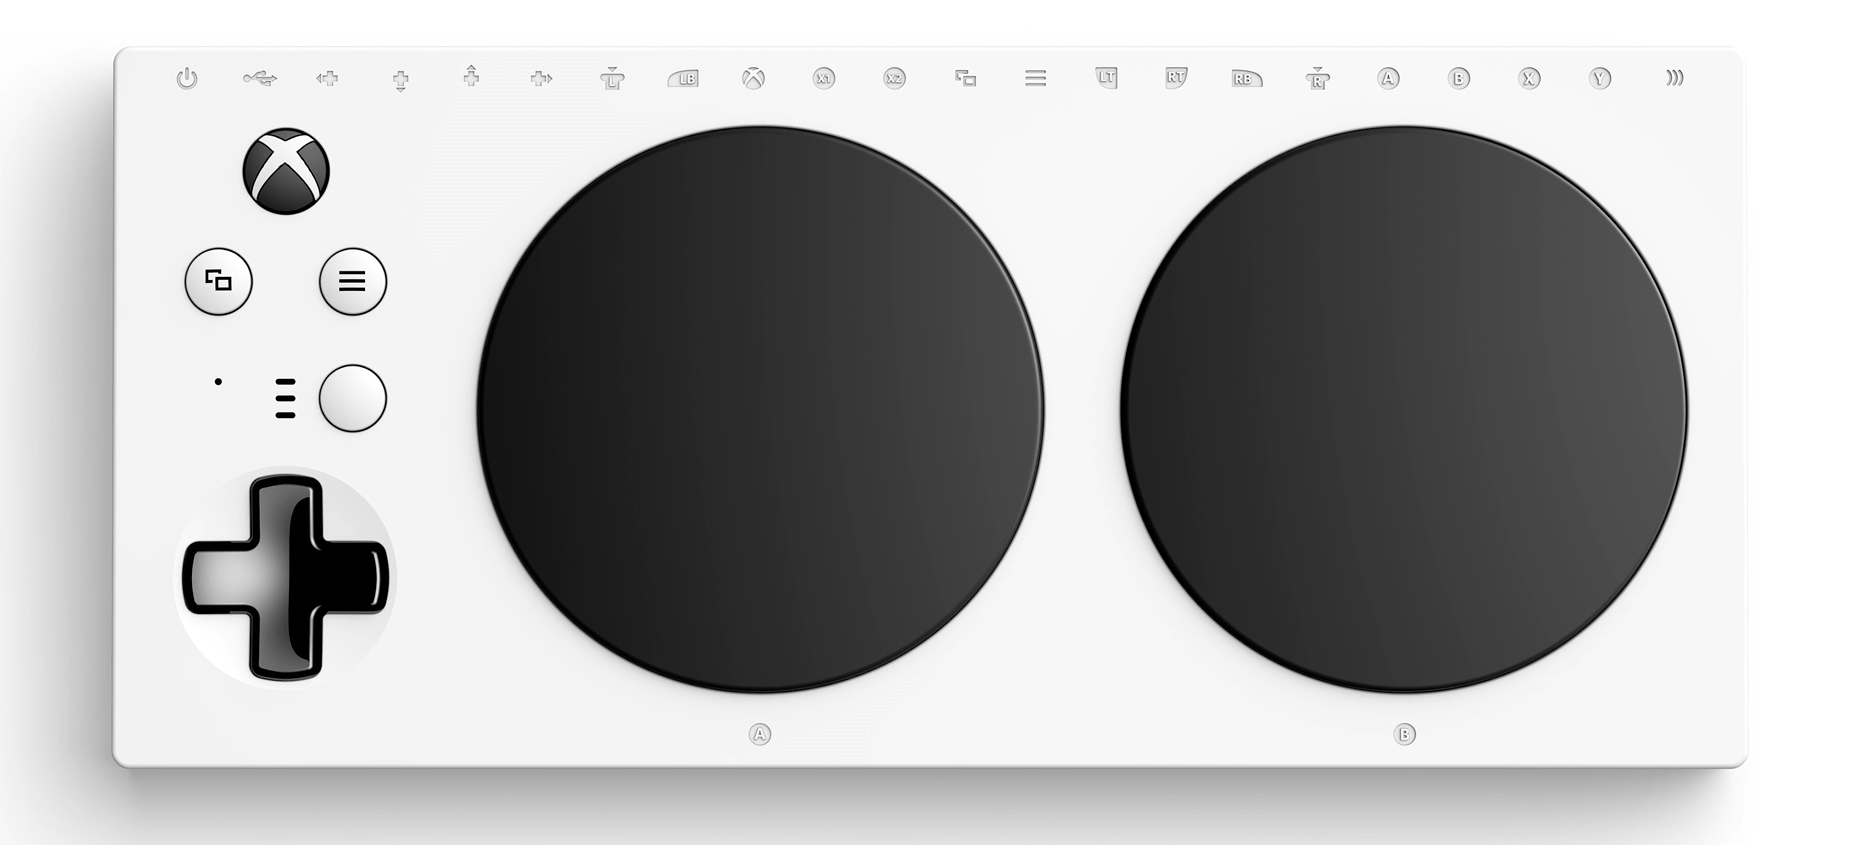 The Xbox Adaptive Controller viewed from directly above it.